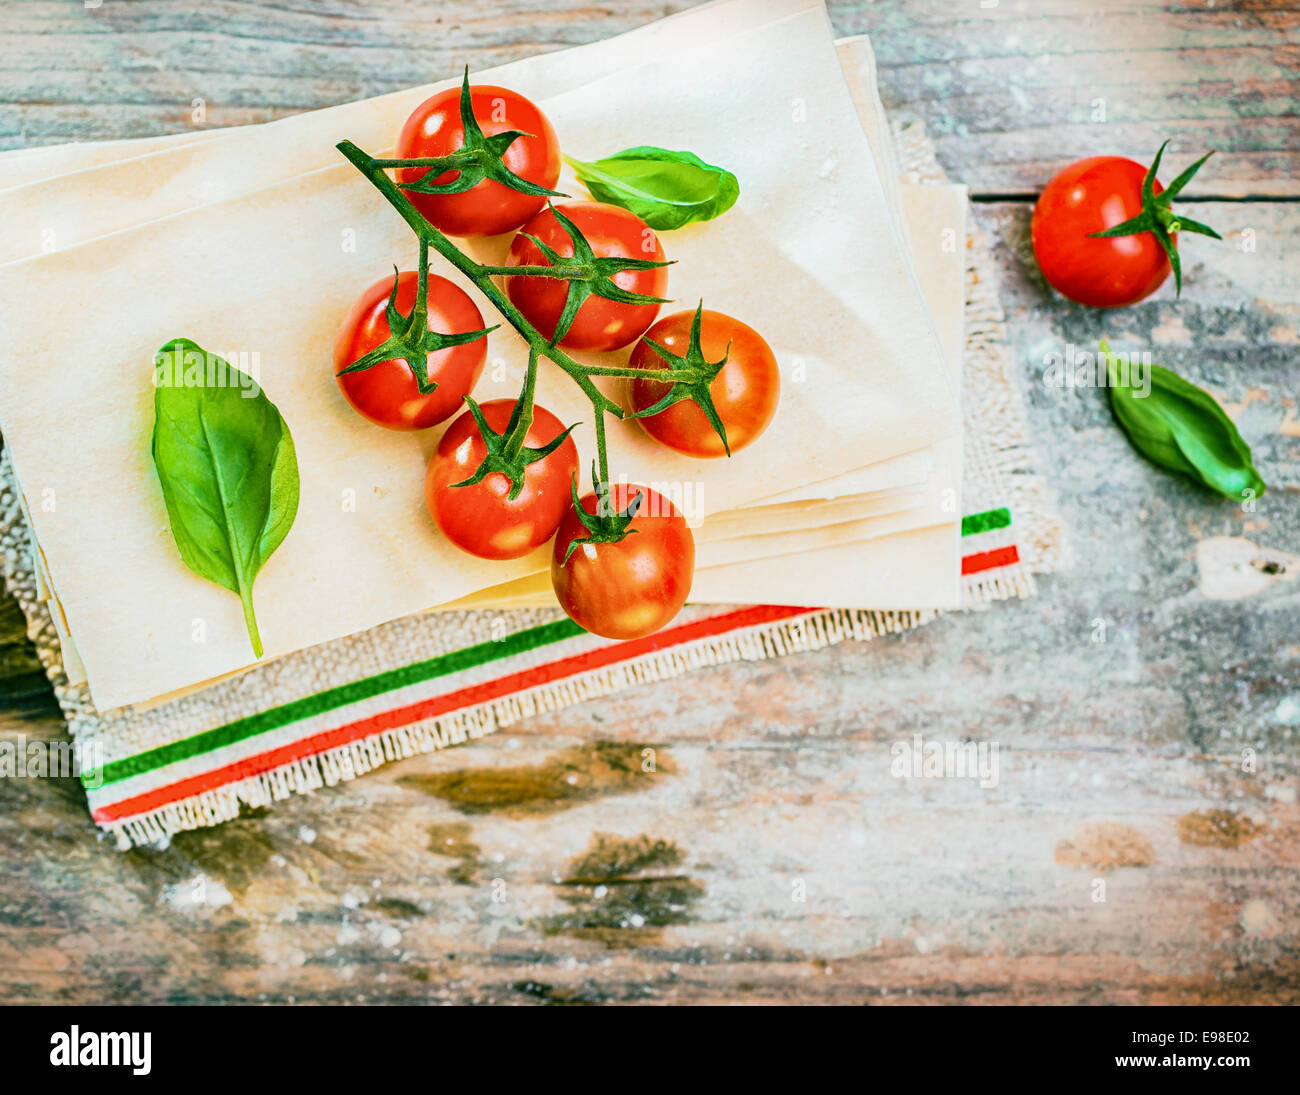 Cherry tomatoes, basil and dried lasagne sheets on an old weathered wooden table in a rustic kitchen ready to be used as ingredients for an Italian pasta dish, view from above Stock Photo